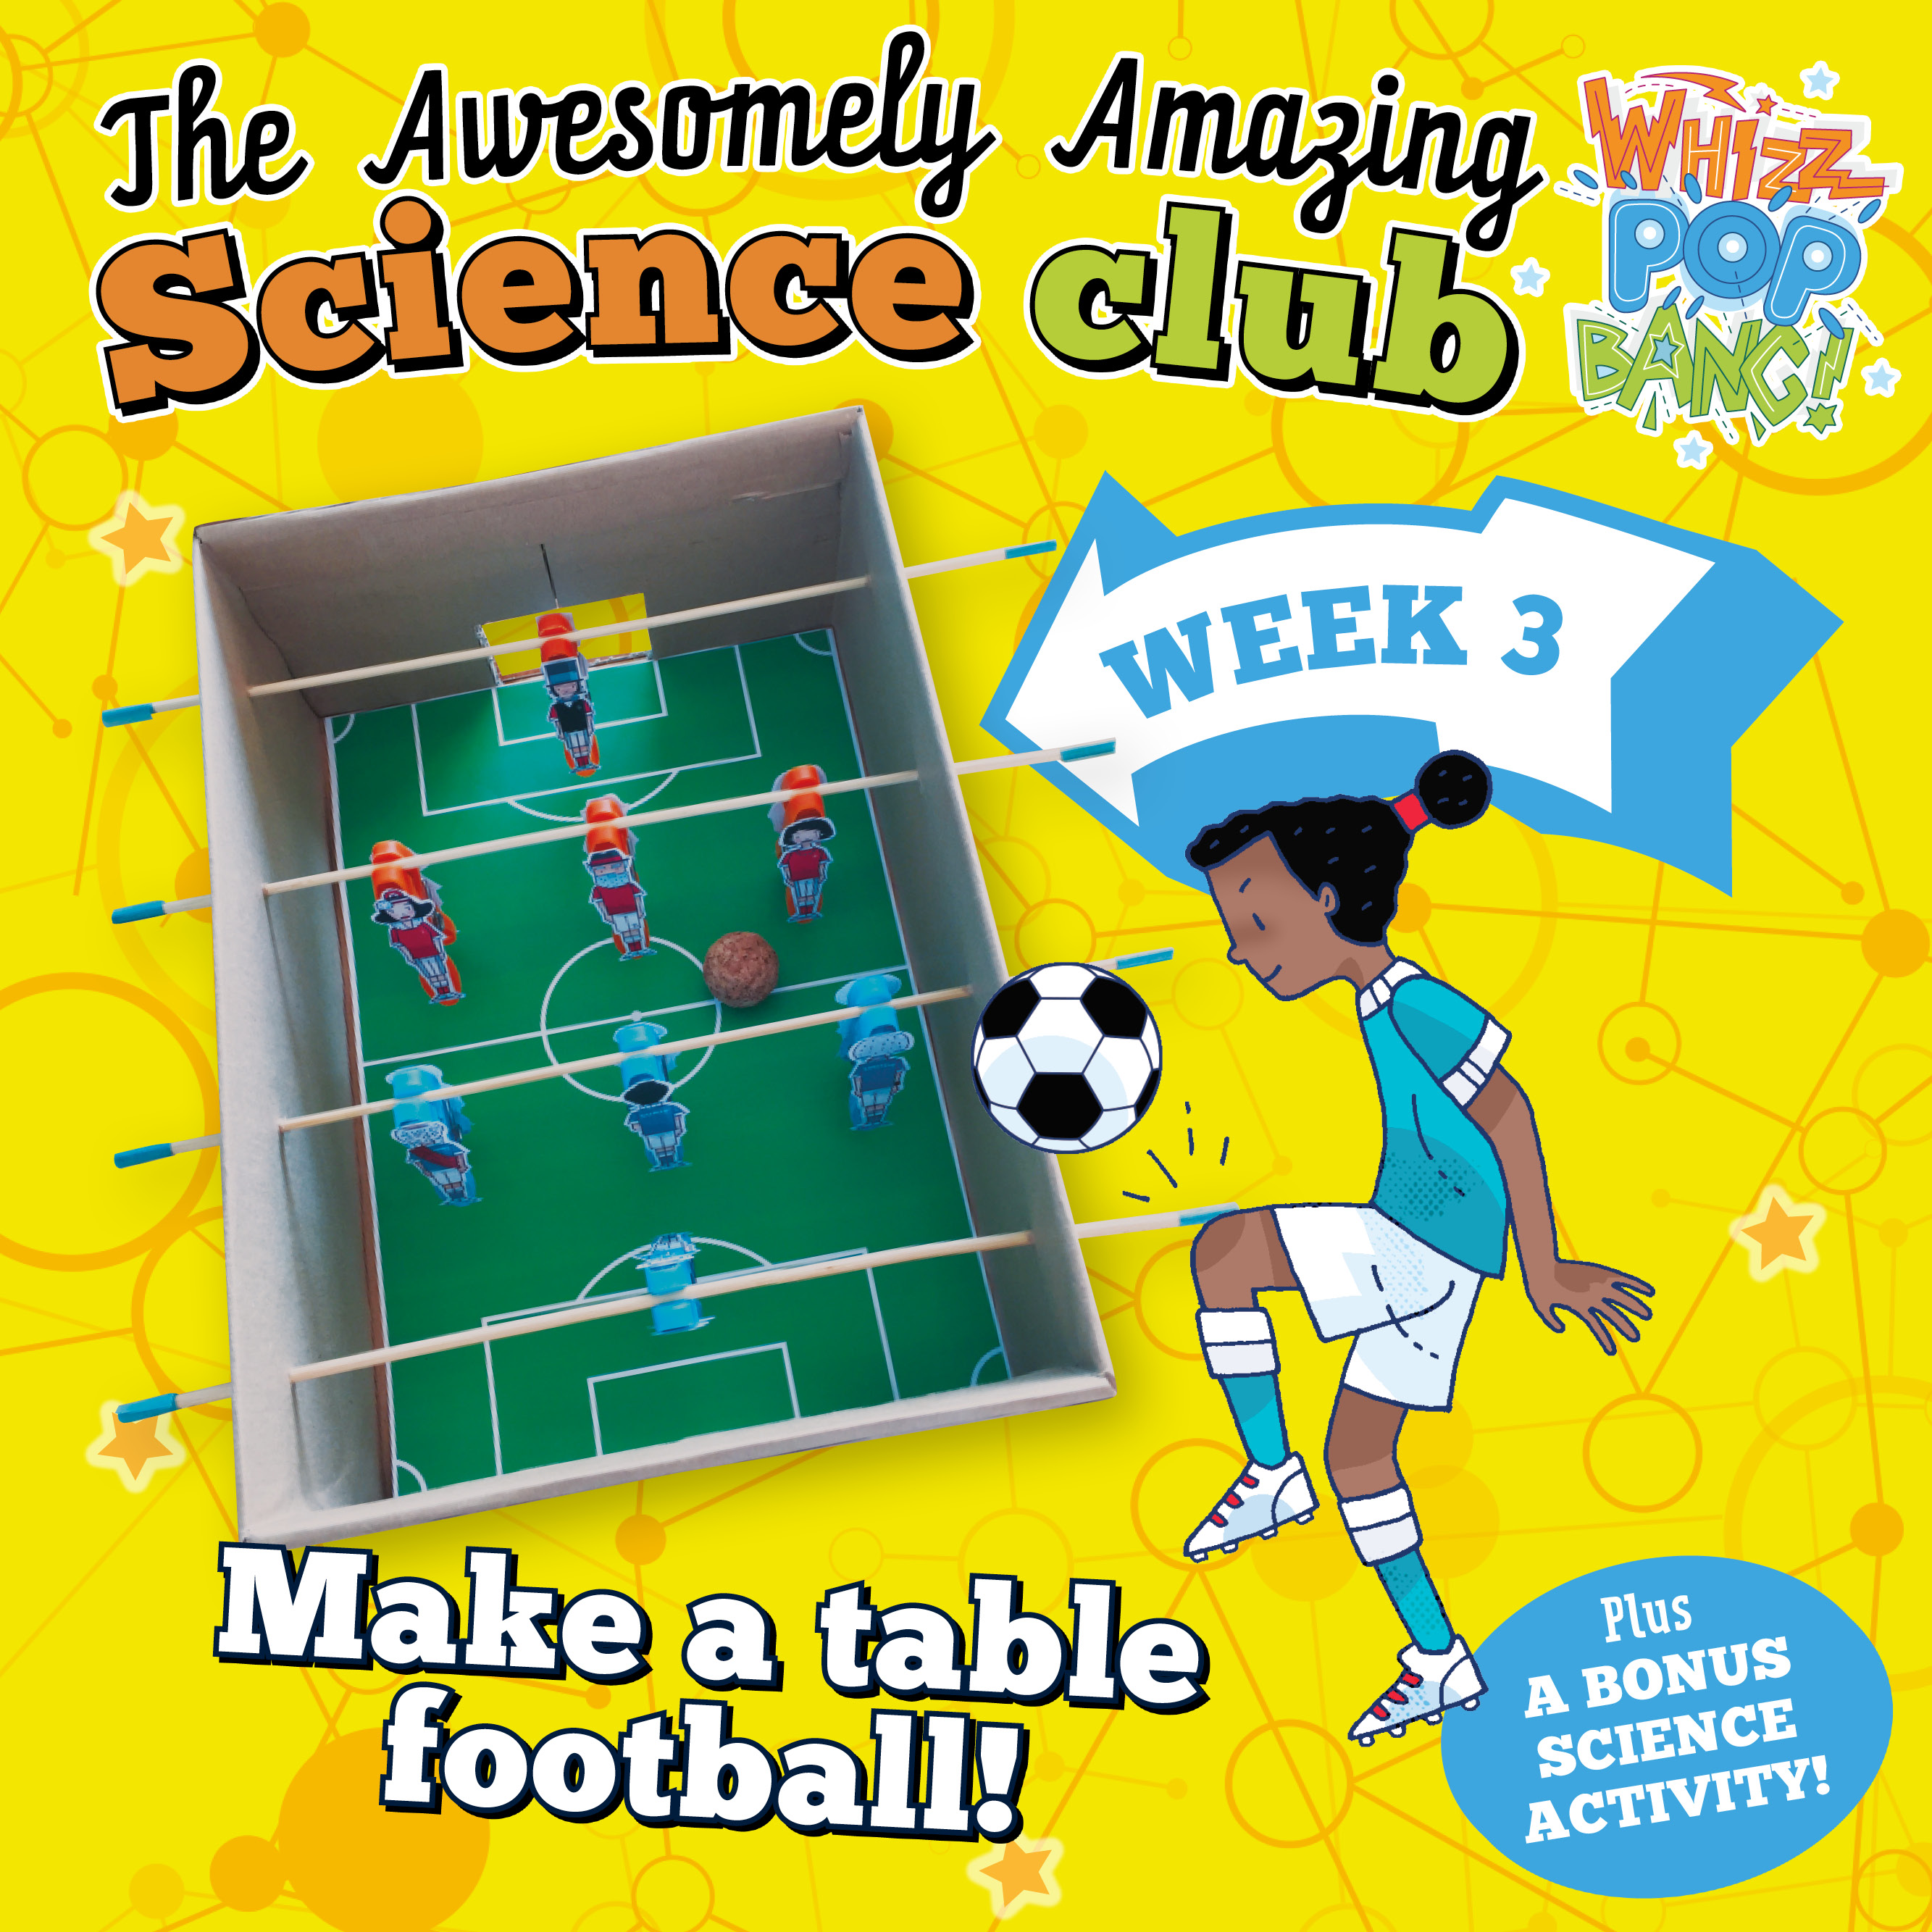 Science club - table football craft activity